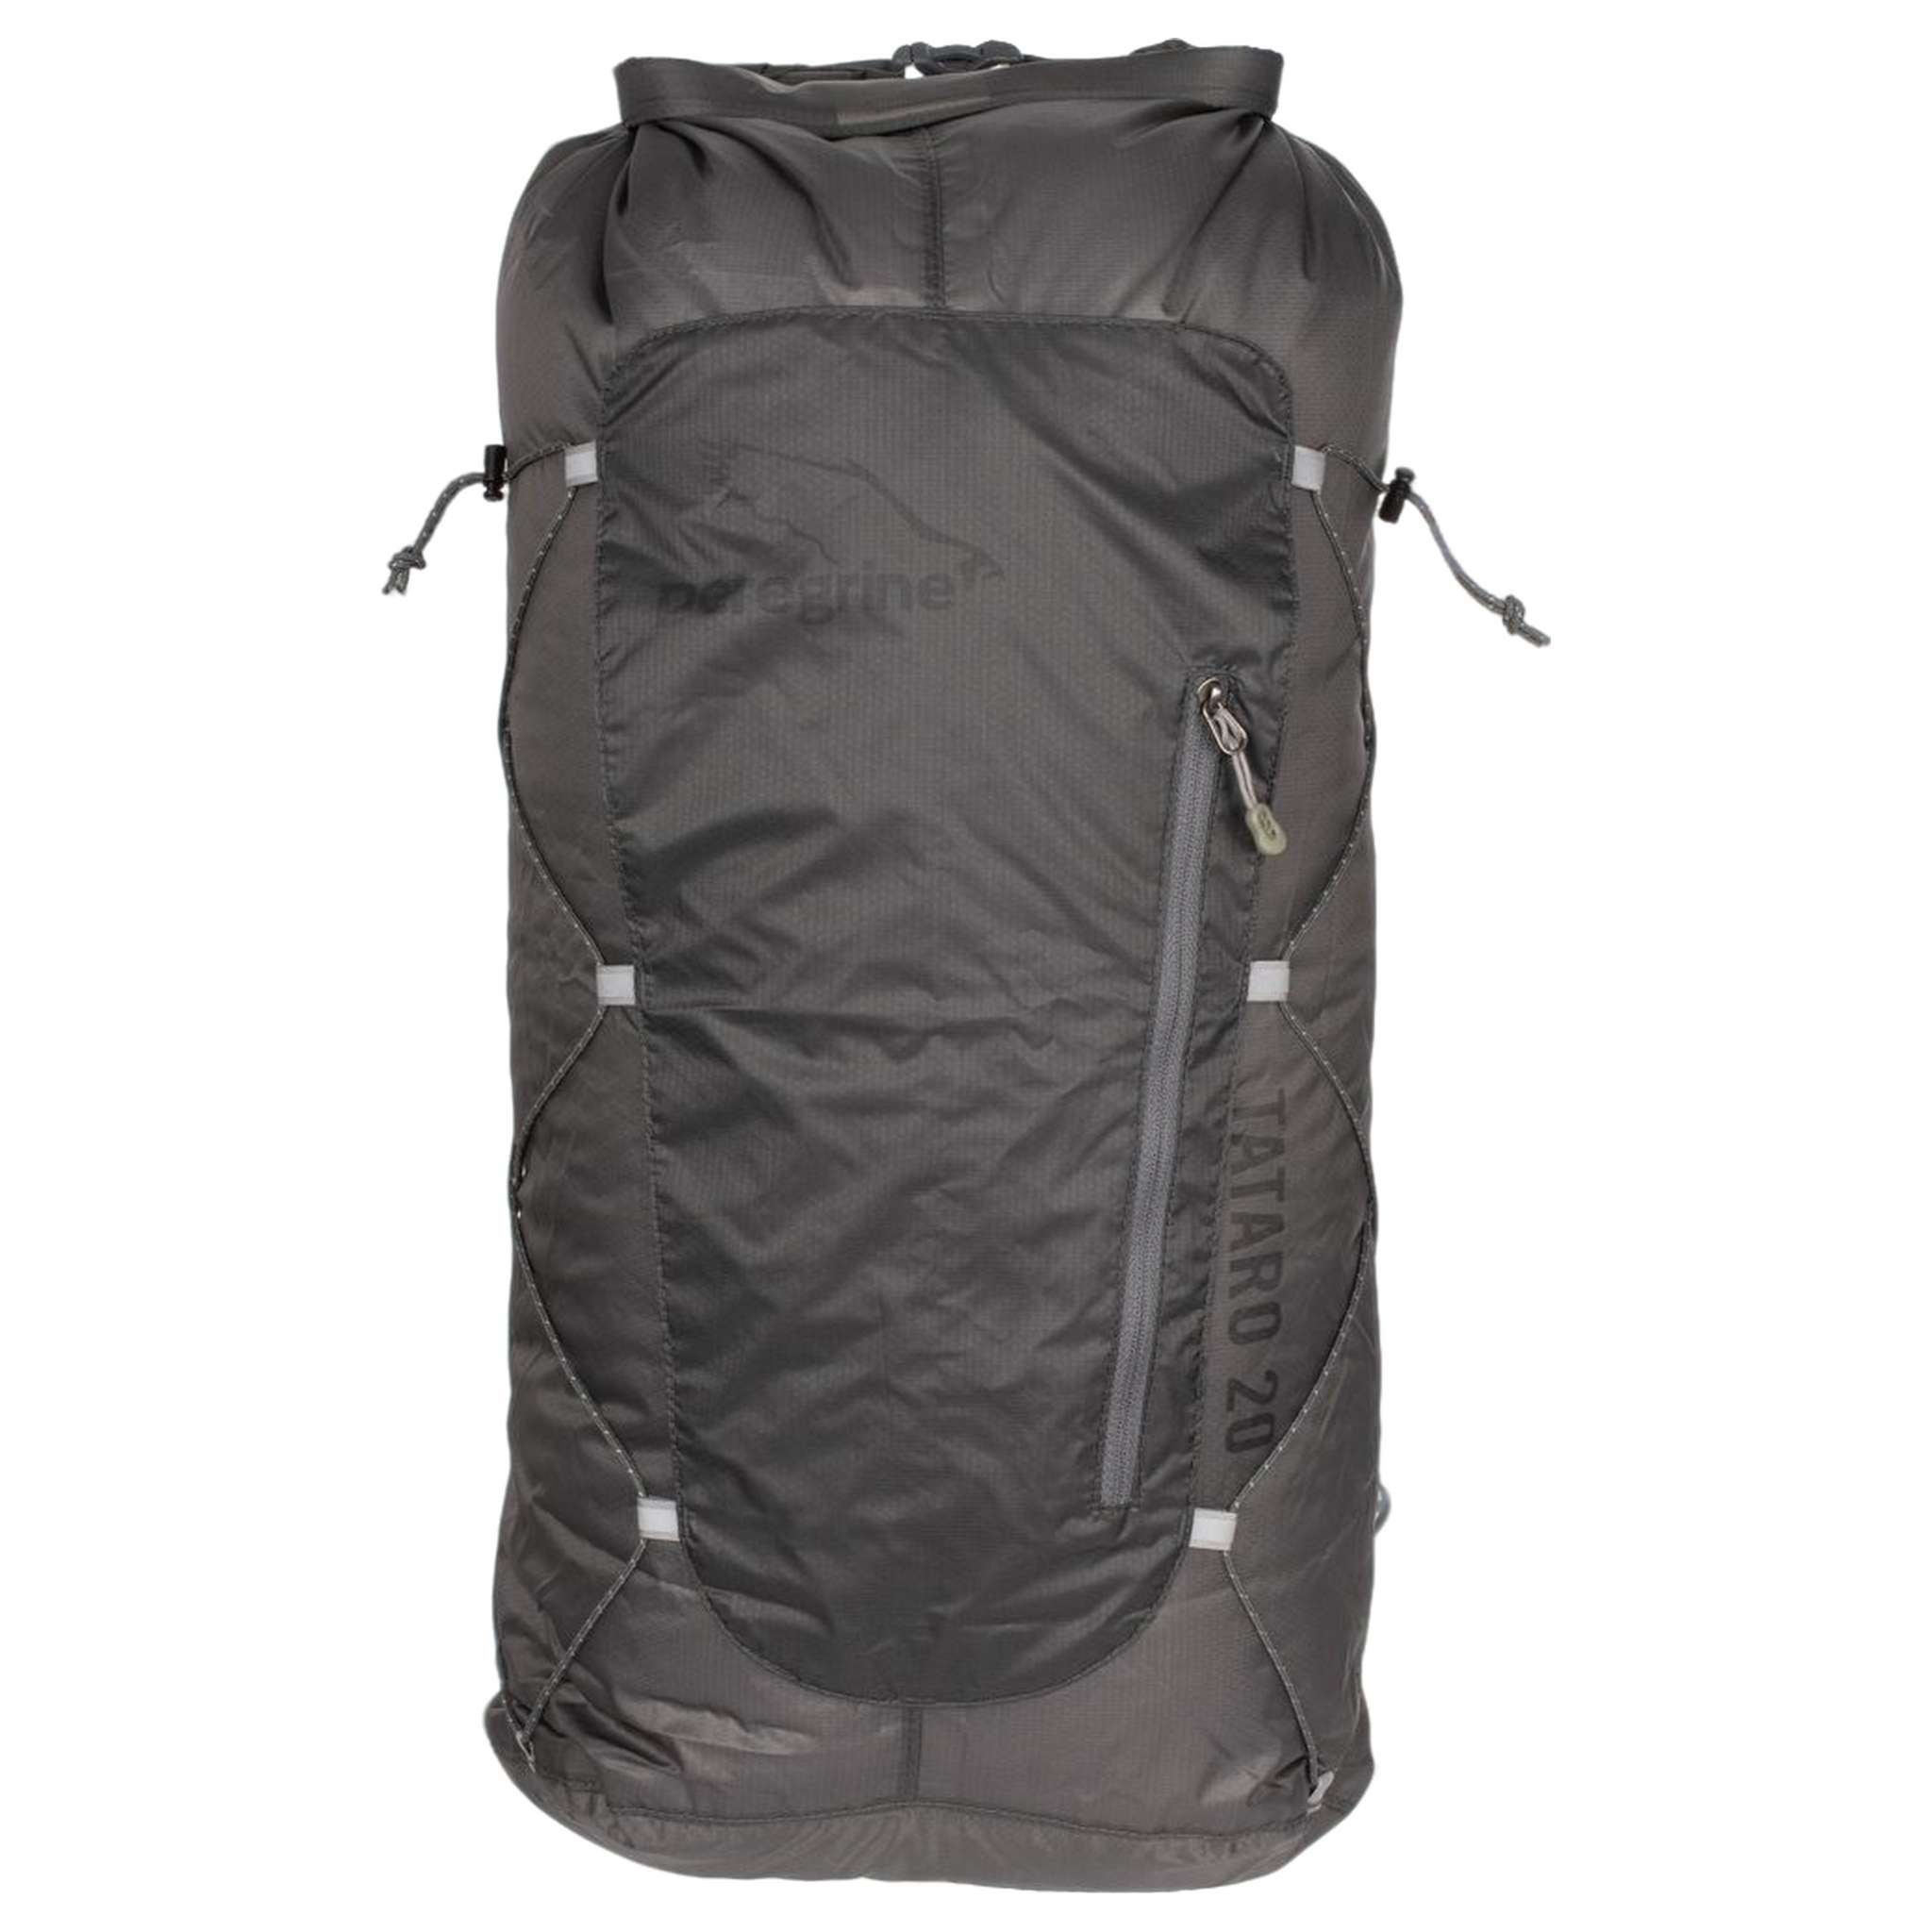 TATARO 20L Ultralight Dry Backpack - Seam-Sealed, Durable for All Climates